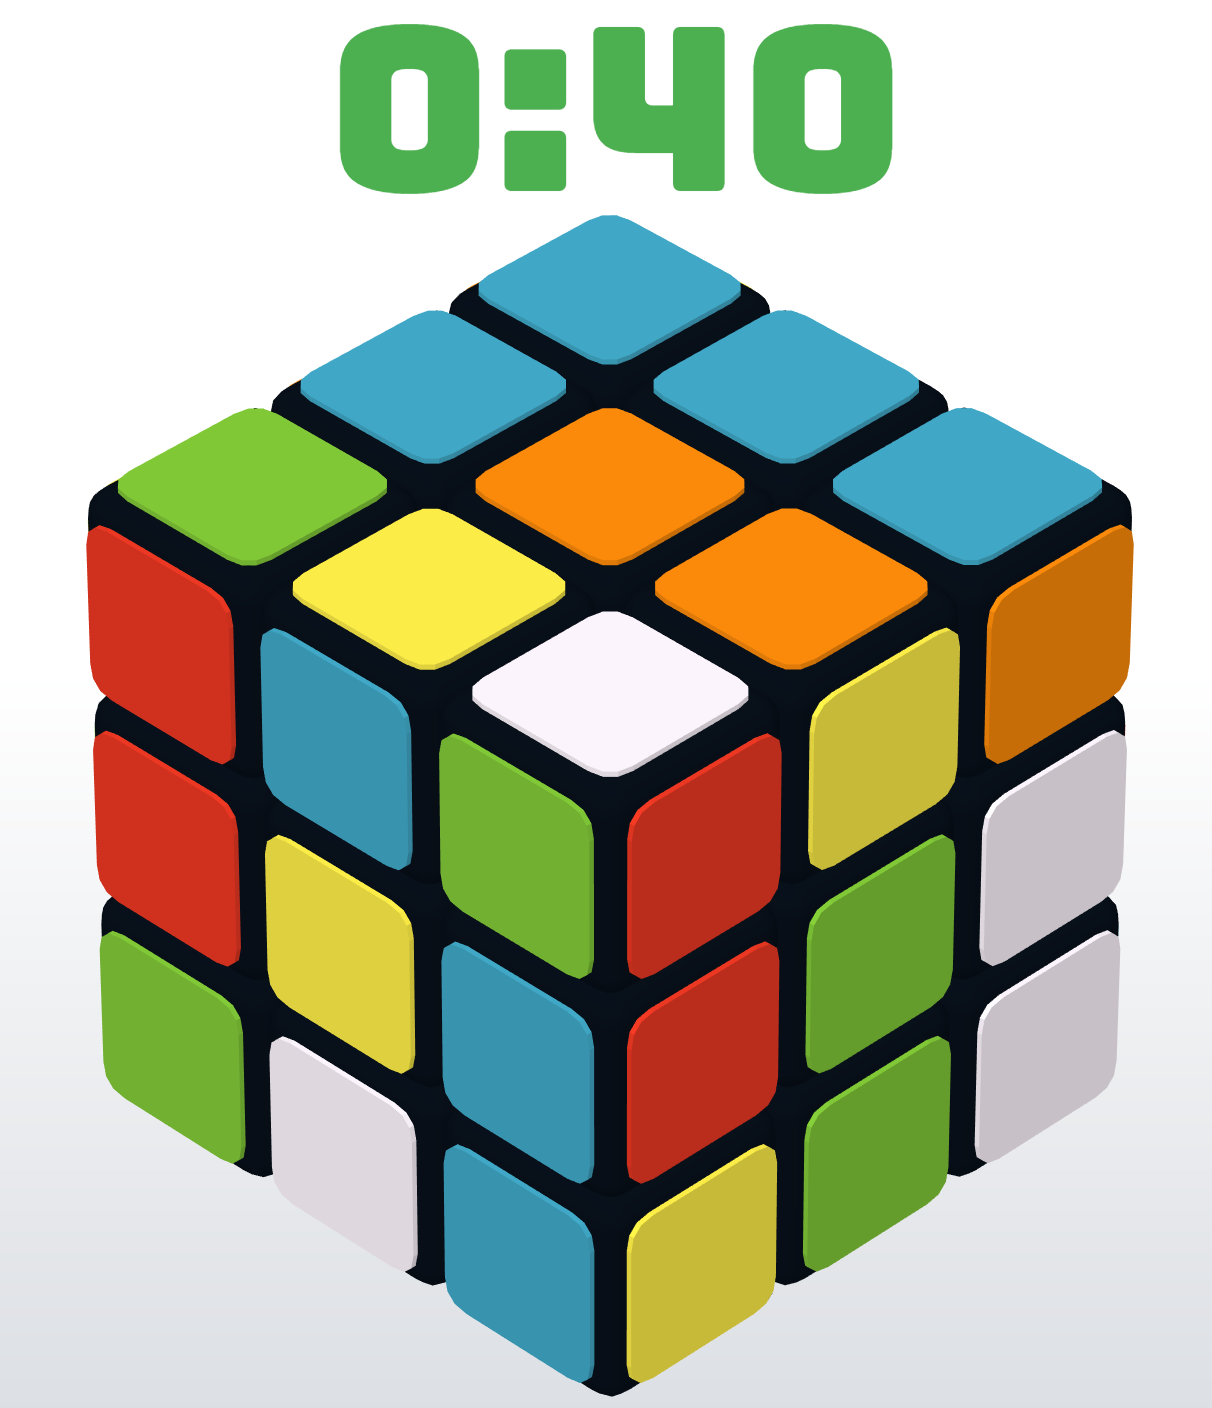 rubiks cube timer where you can choose your own picture